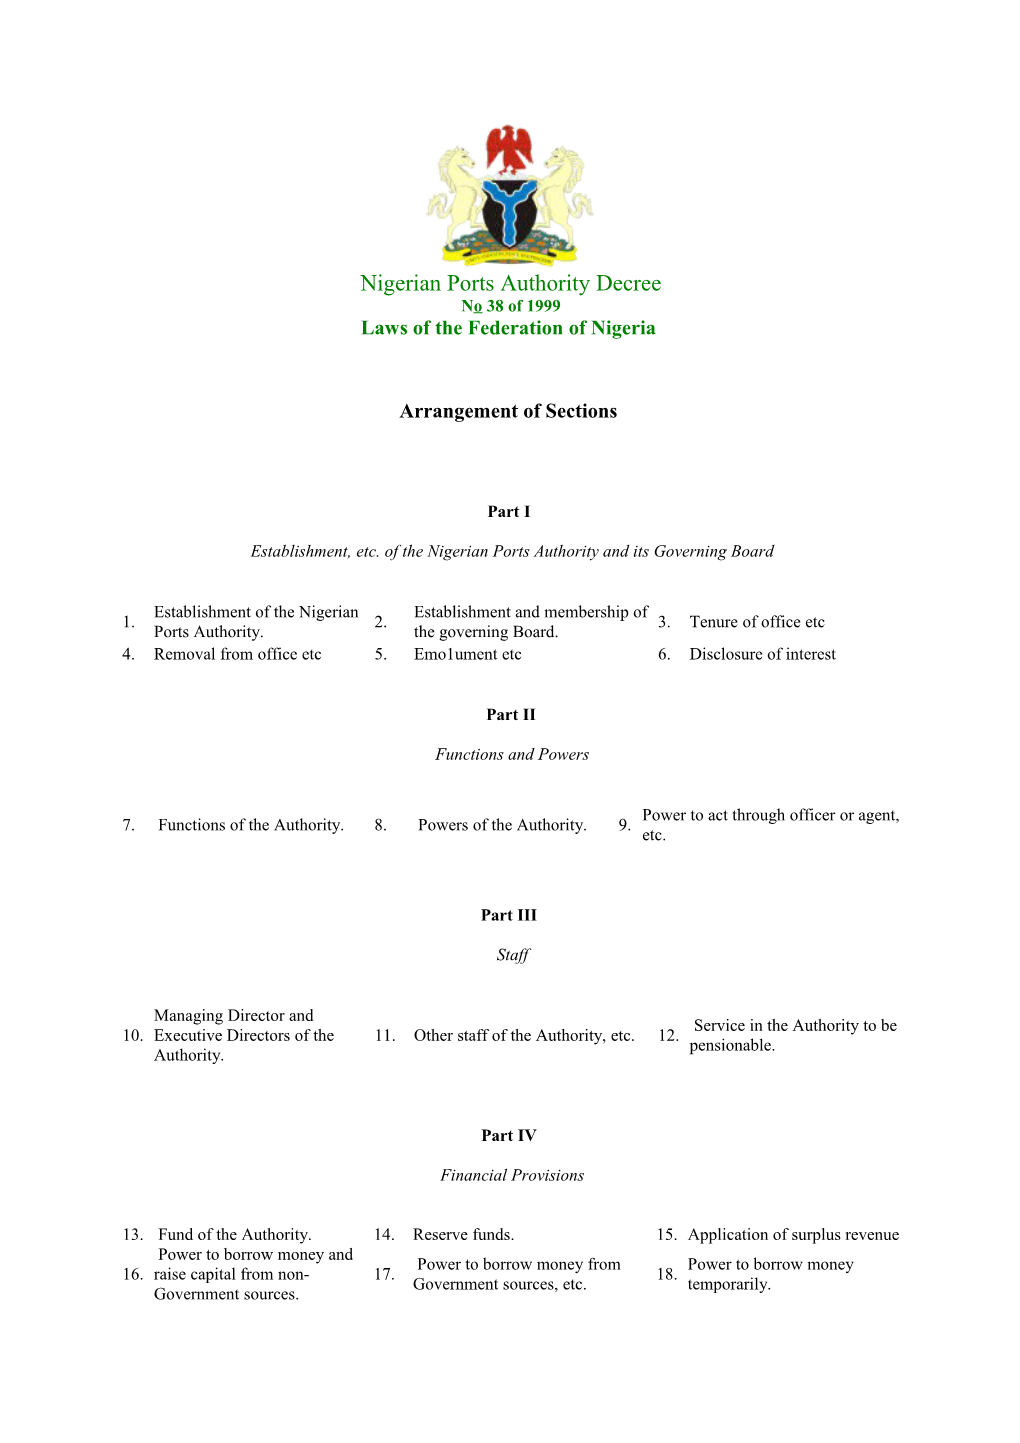 Laws of the Federation of Nigeria